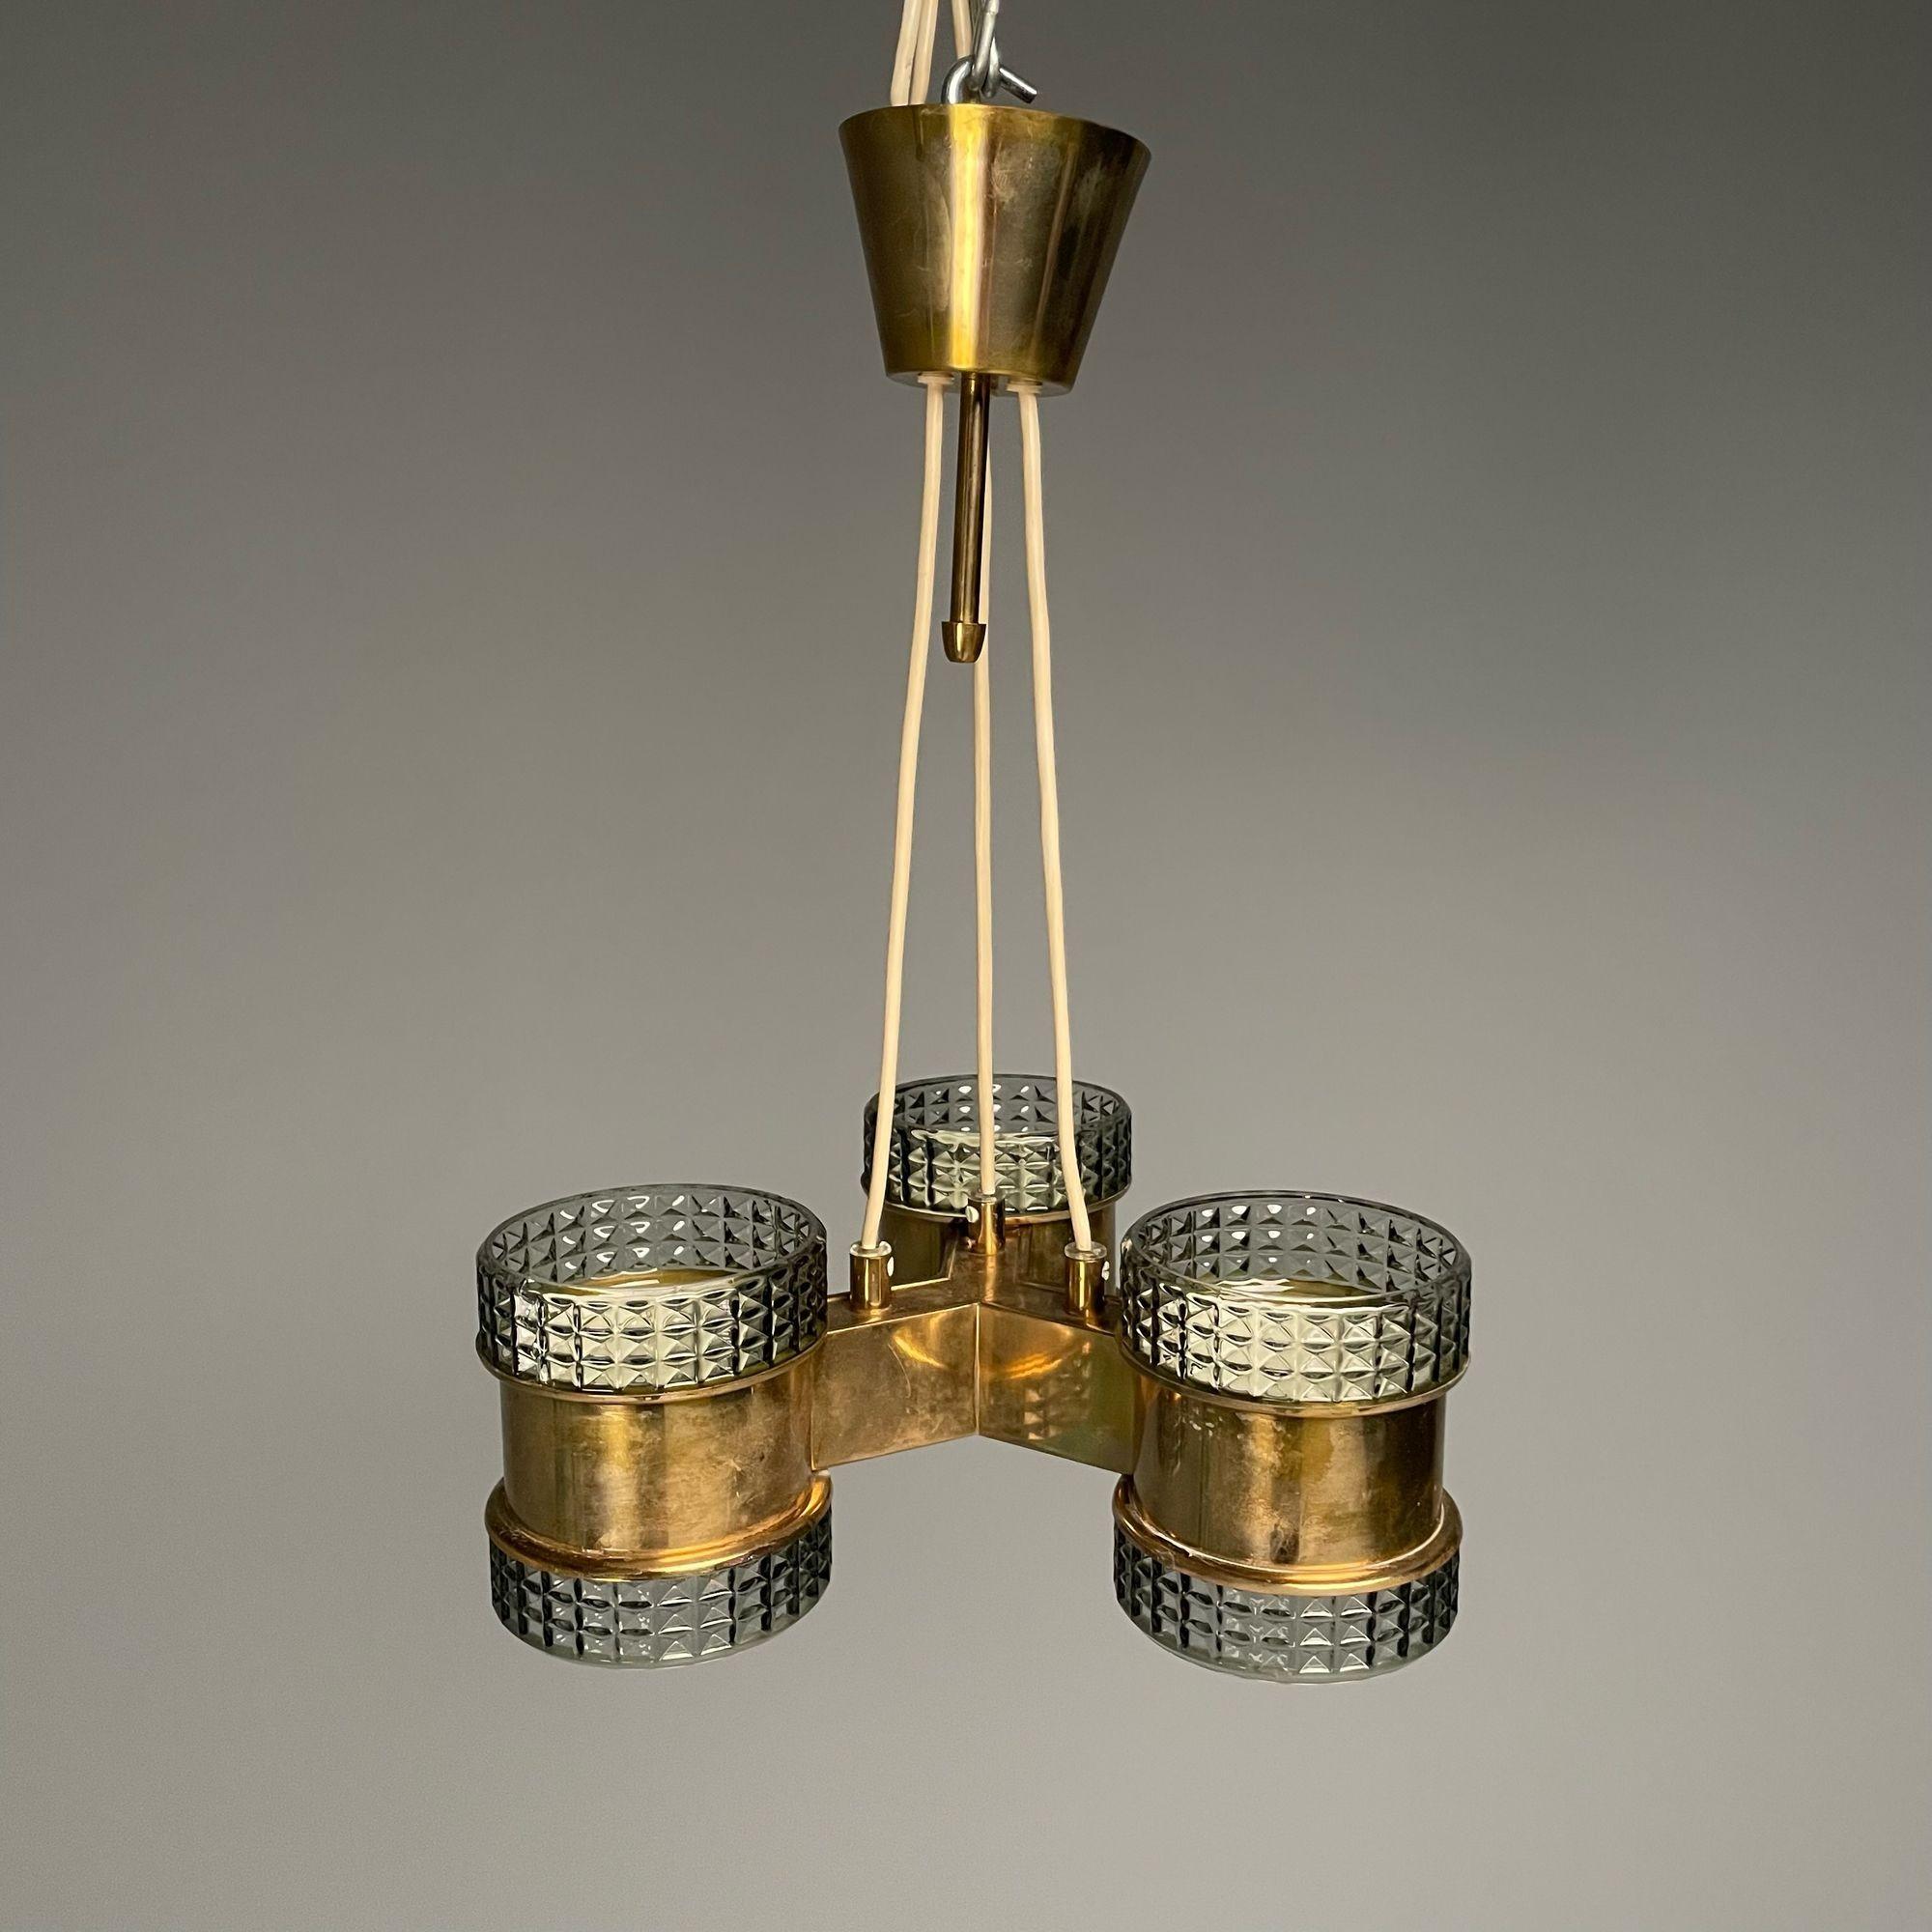 Swedish Mid-Century Modern, Pendant, Glass, Brass, Sweden, 1950s

Swedish modern chandelier or pendant designed and produced in Sweden in the middle of the 20th century. This example features a cable suspension, three texted glass shades, and a